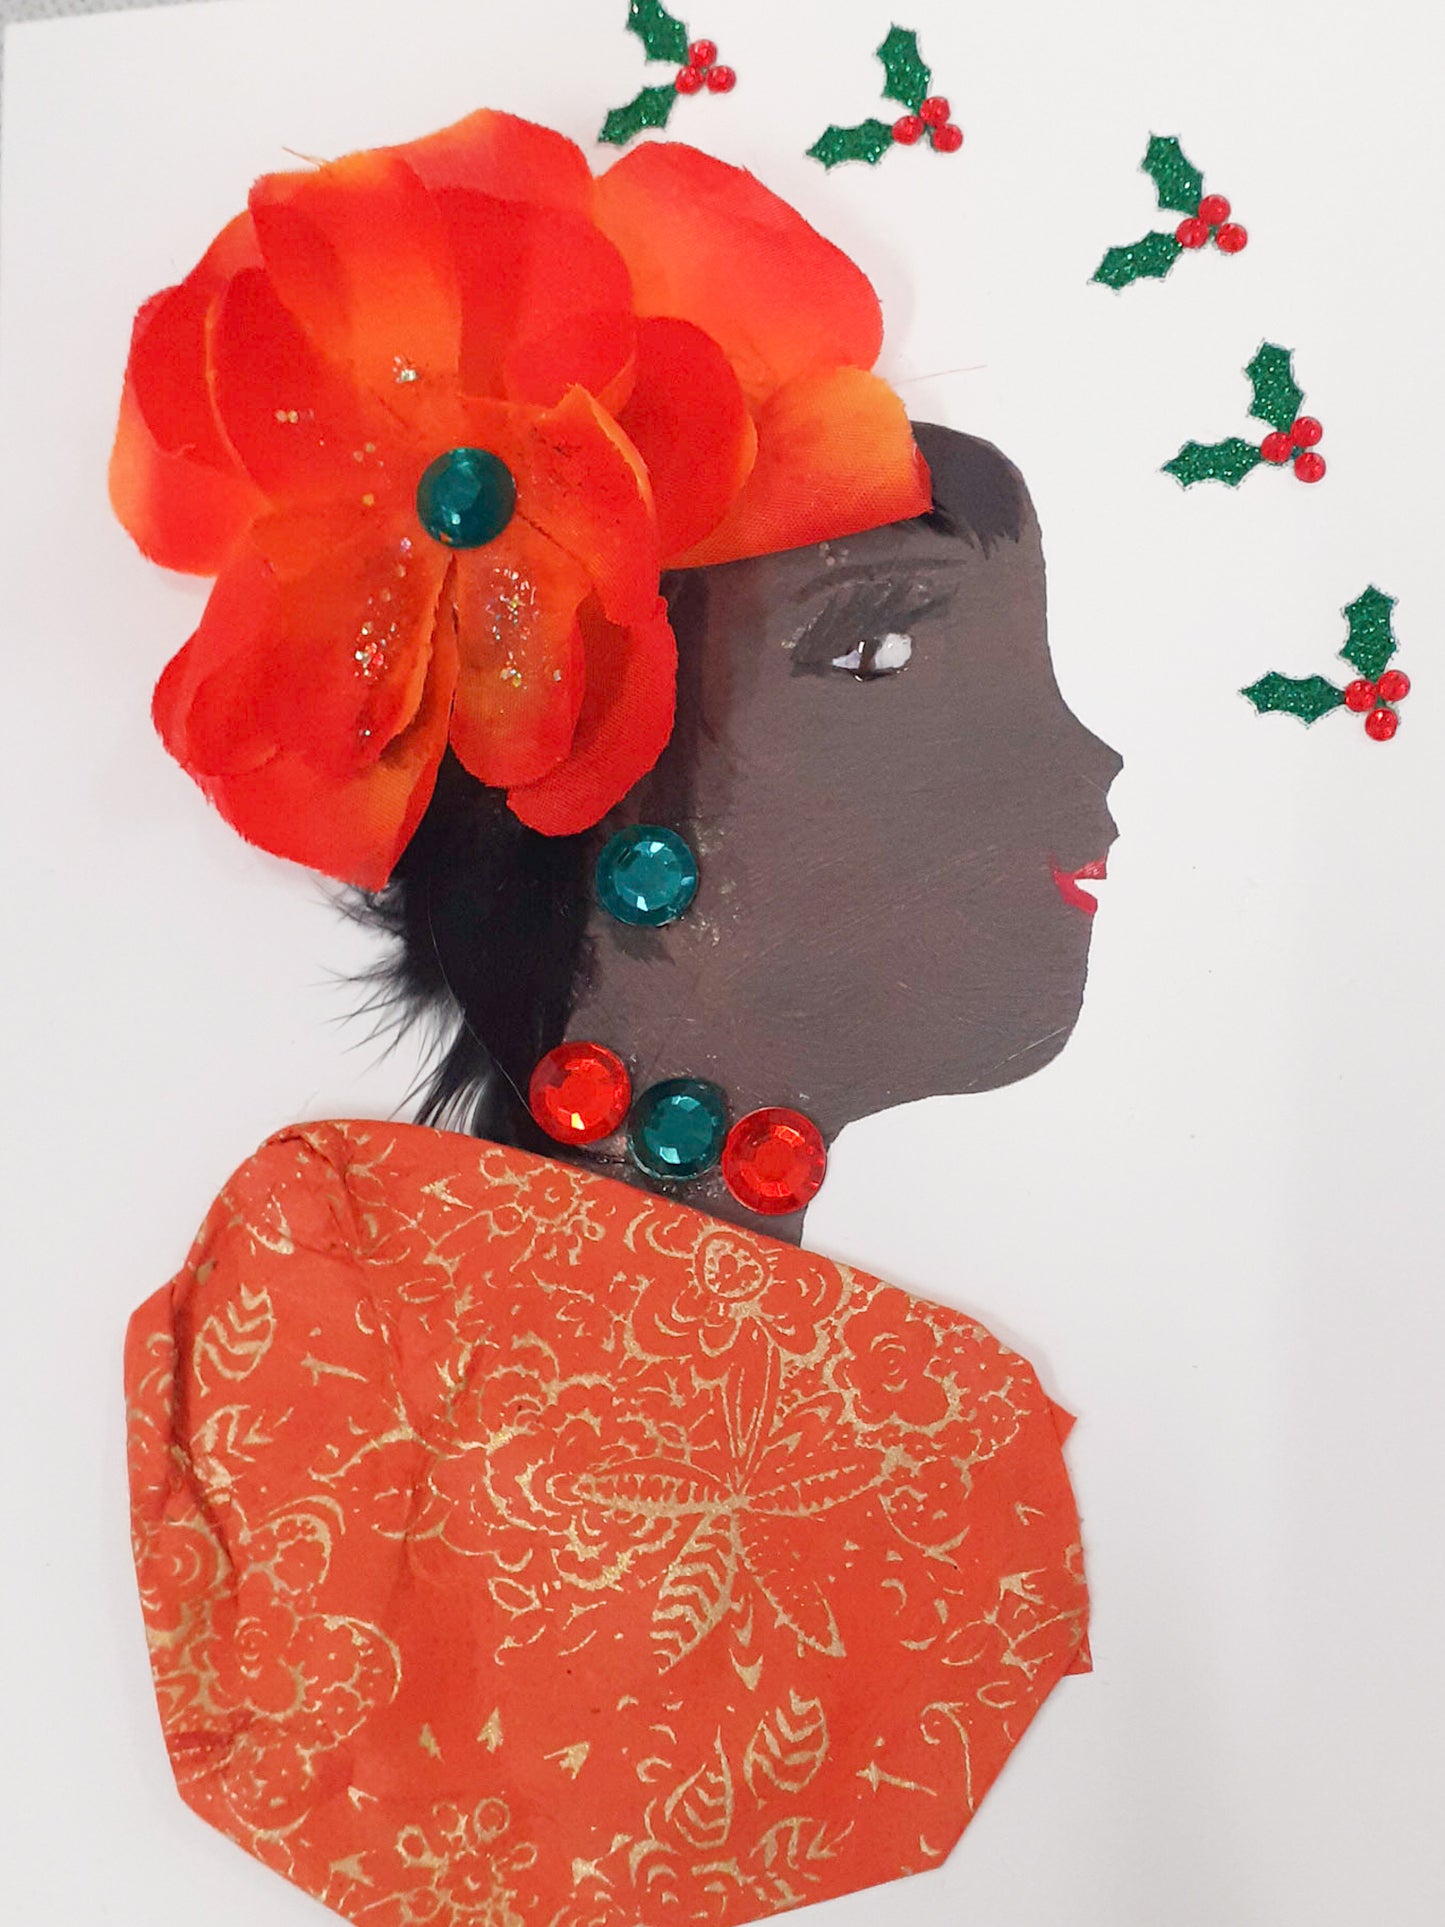 This card is called Orange Party. She wears a orange blouse with gold floral detail, and a large orange flower in her hair. Surrounding her, there is mistletoe. 